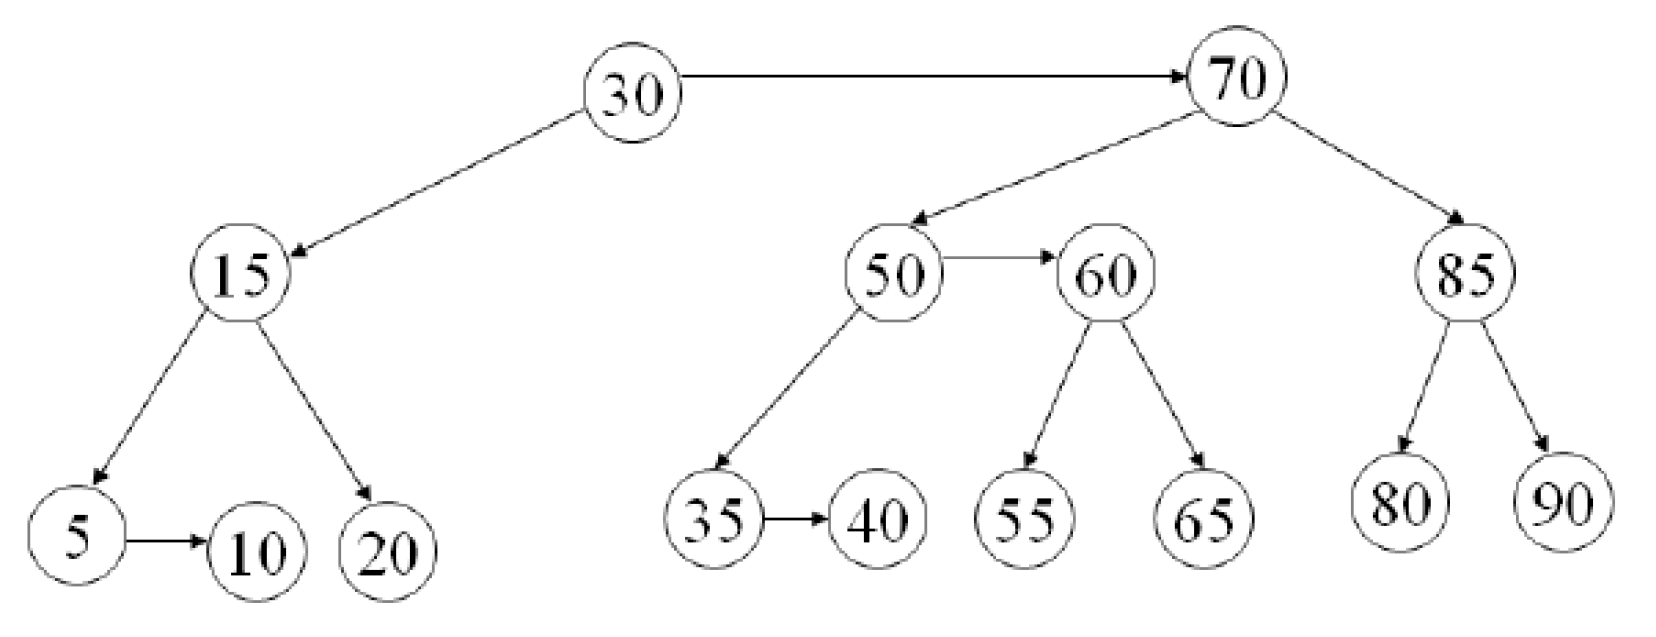 data-structure-46.png